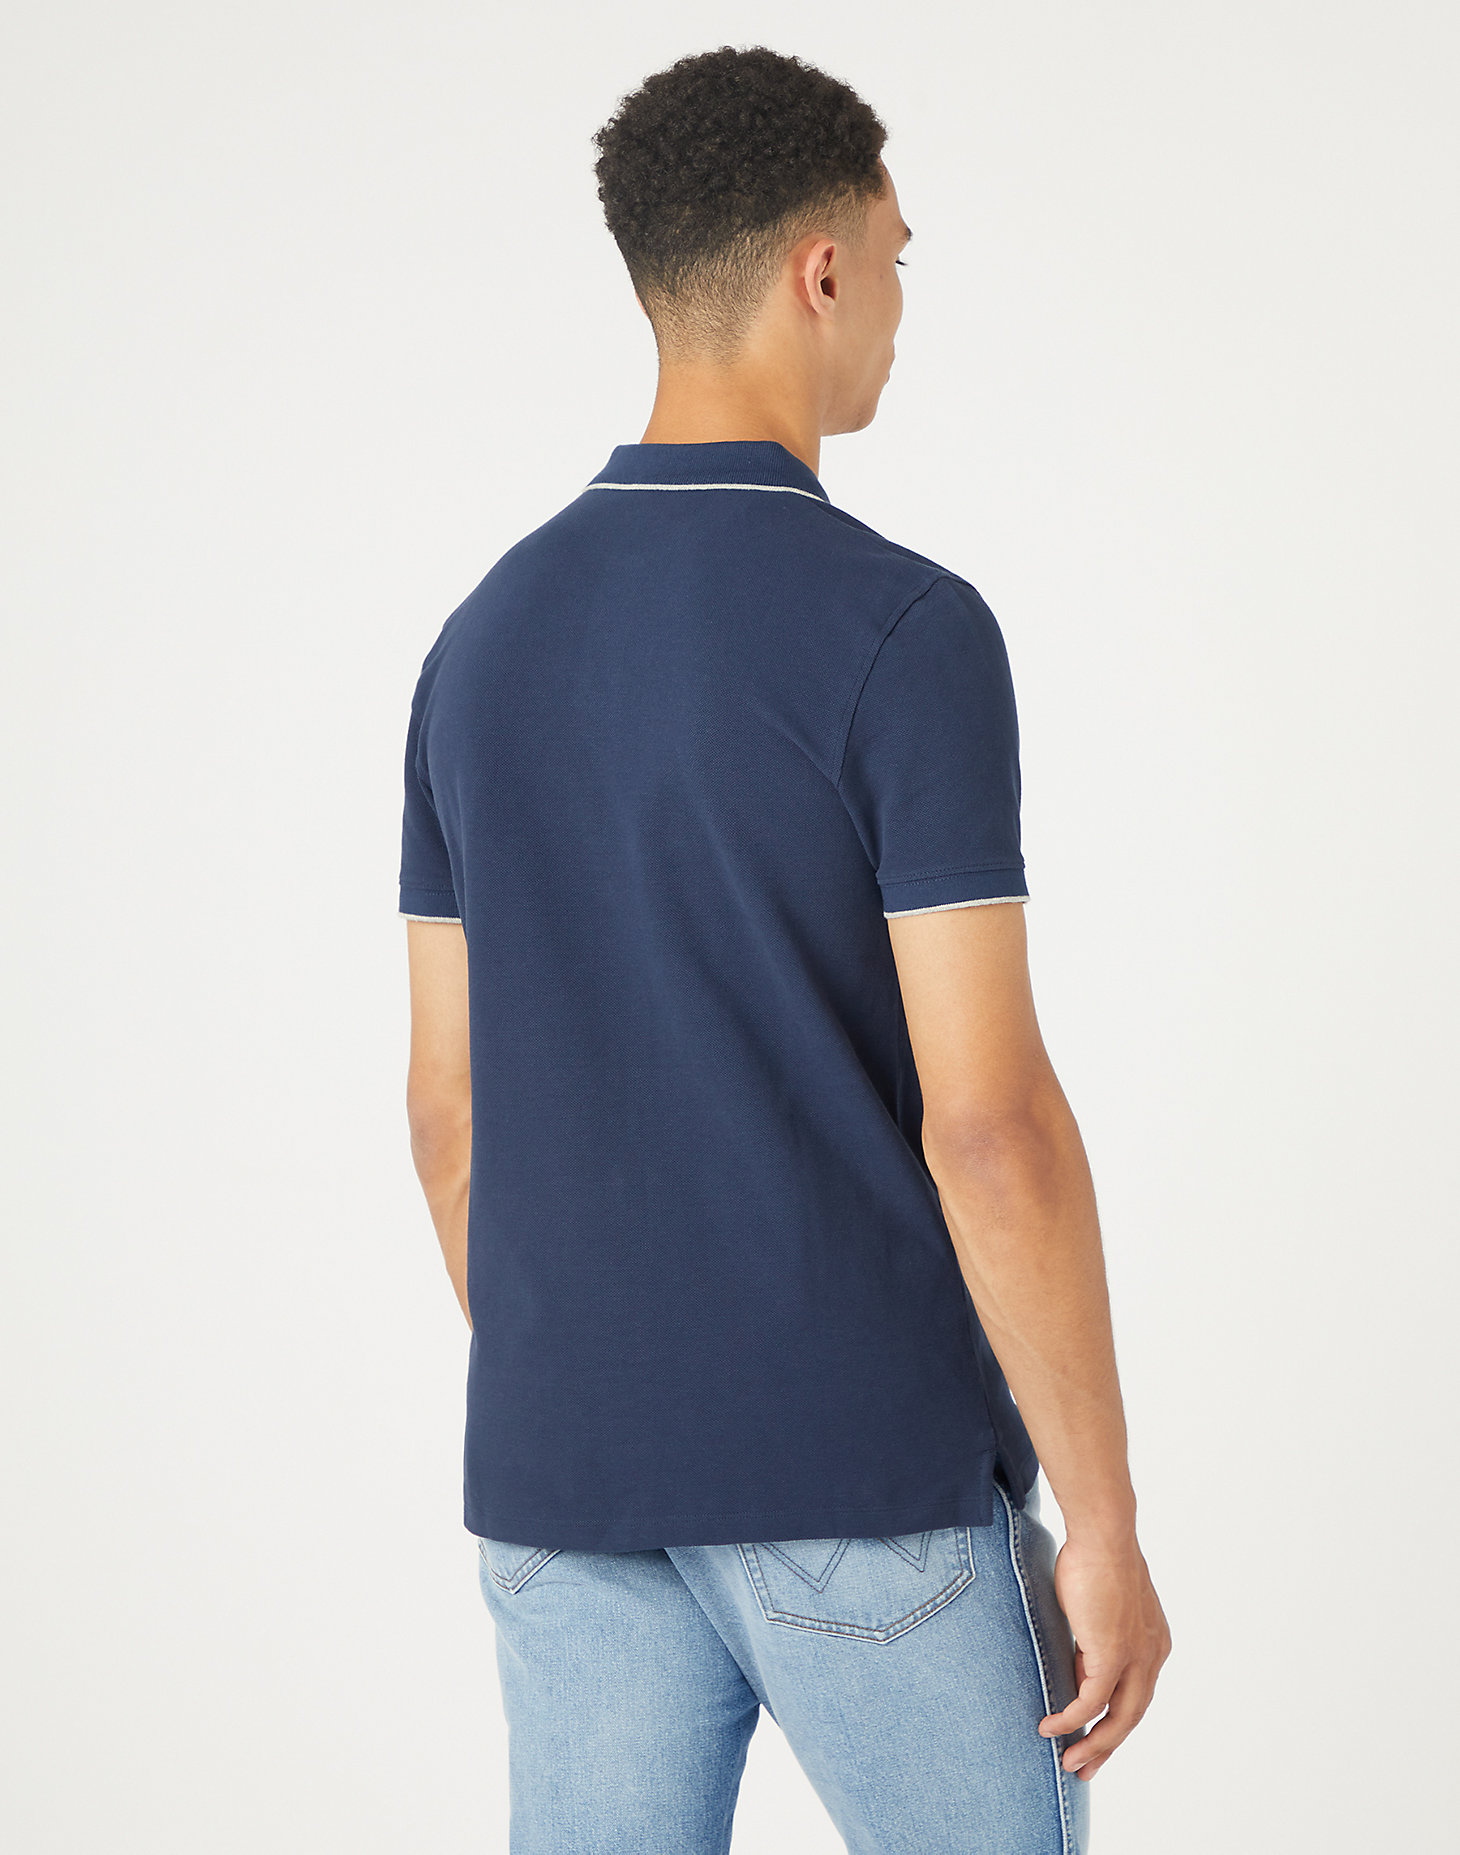 Polo Shirt in Navy alternative view 2